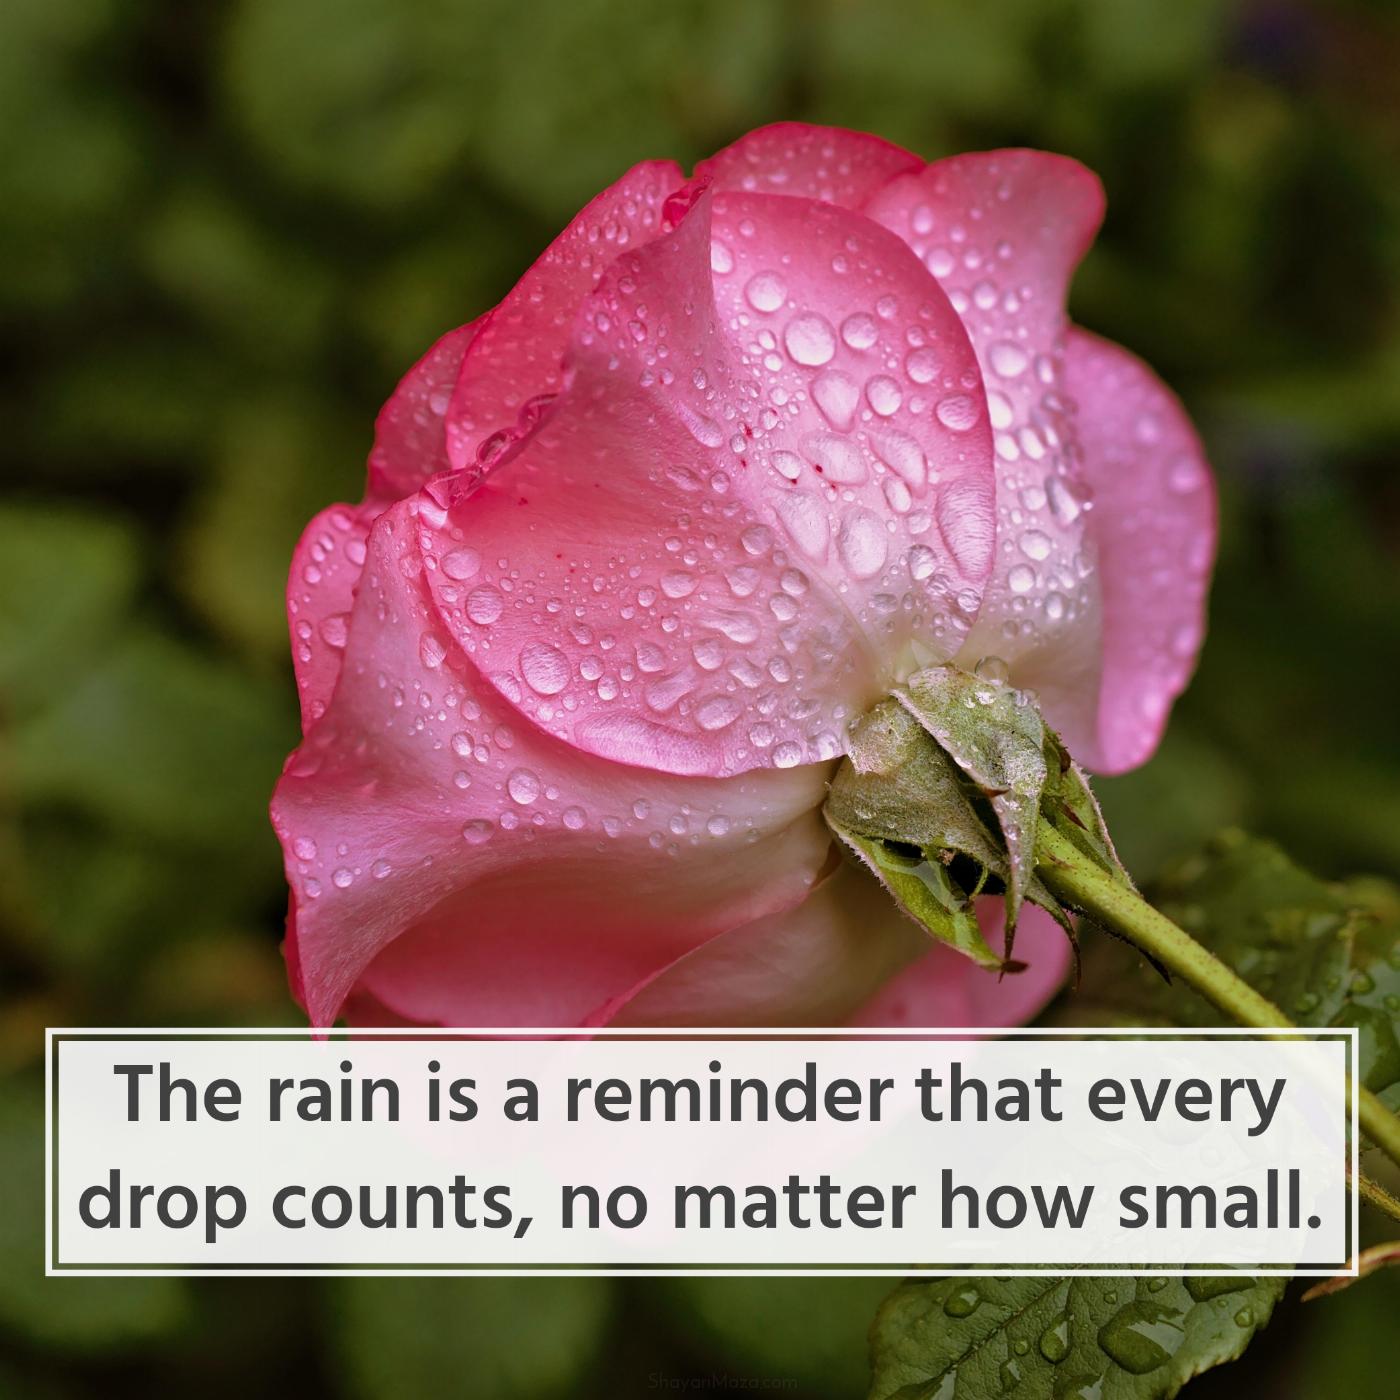 The rain is a reminder that every drop counts no matter how small